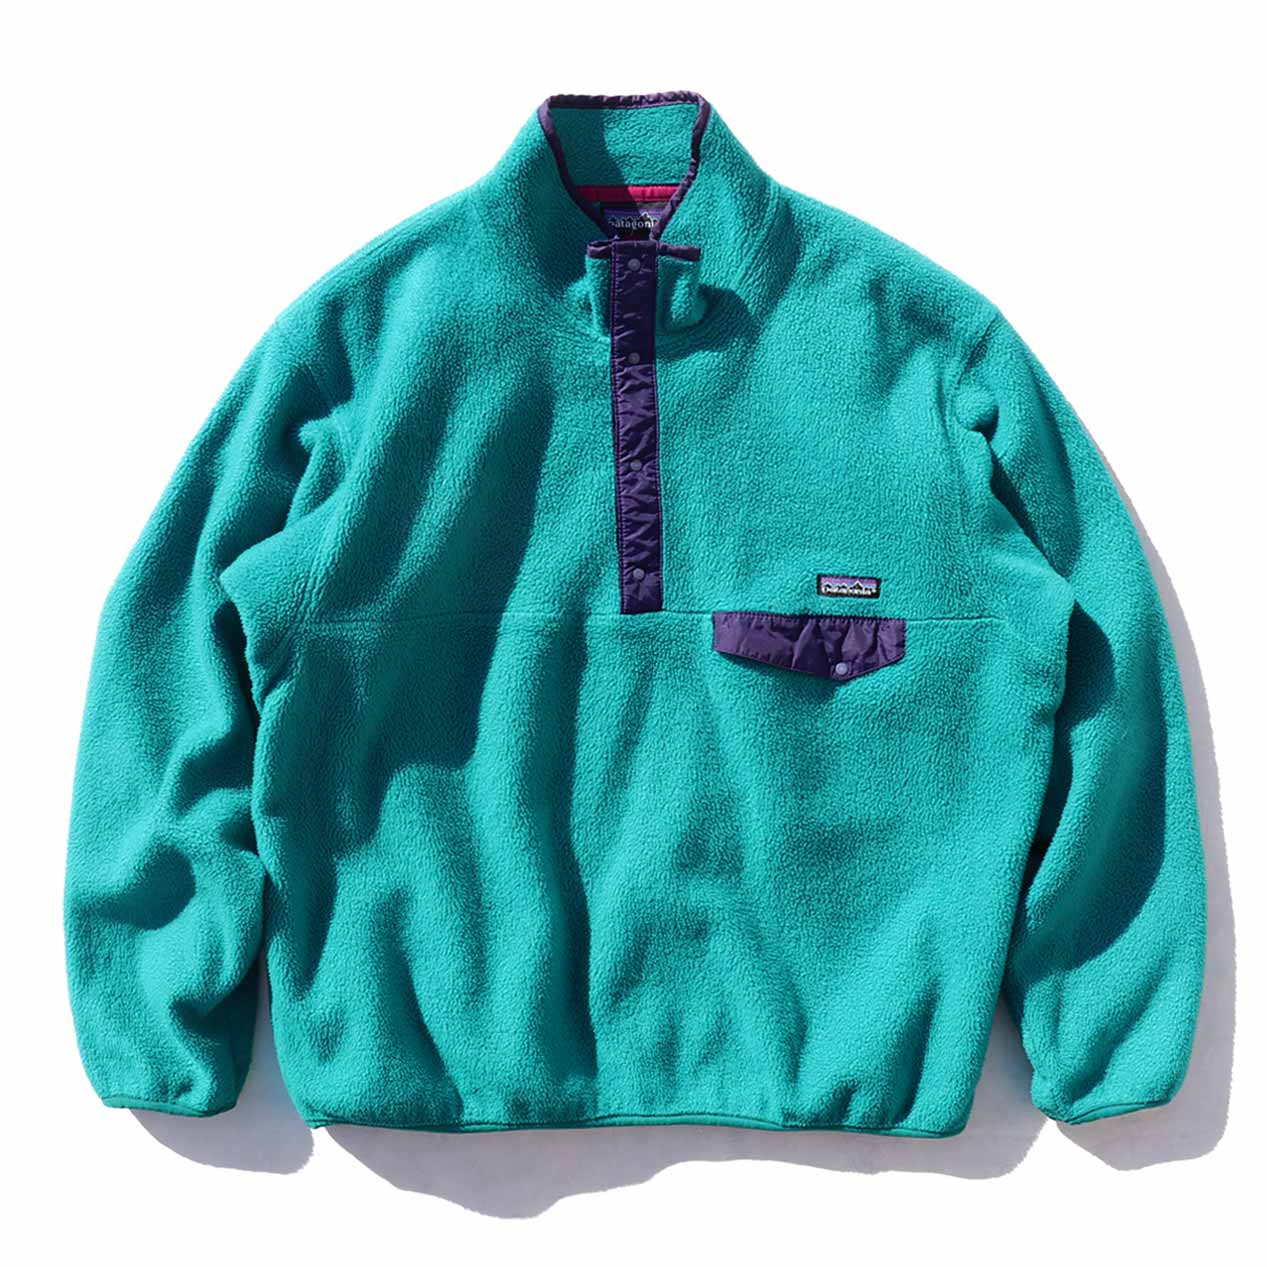 POST JUNK / '90 PATAGONIA Synchilla Snap-T Turquoise Made In ...